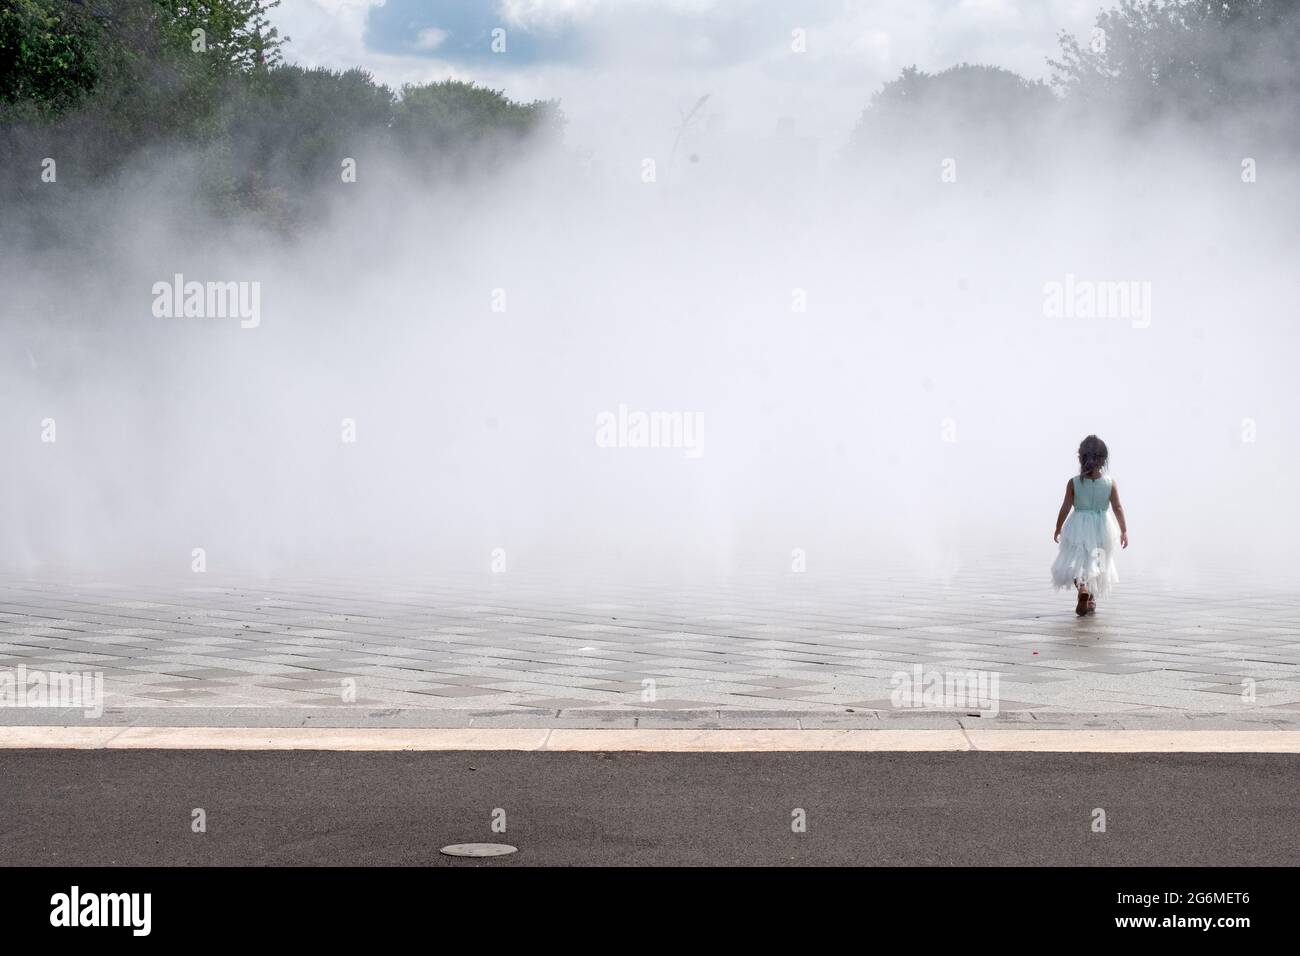 A young unattended girl enters the Fountain of the Fairs in Flushing Meadows Corona Park in Queens, New York City. Stock Photo